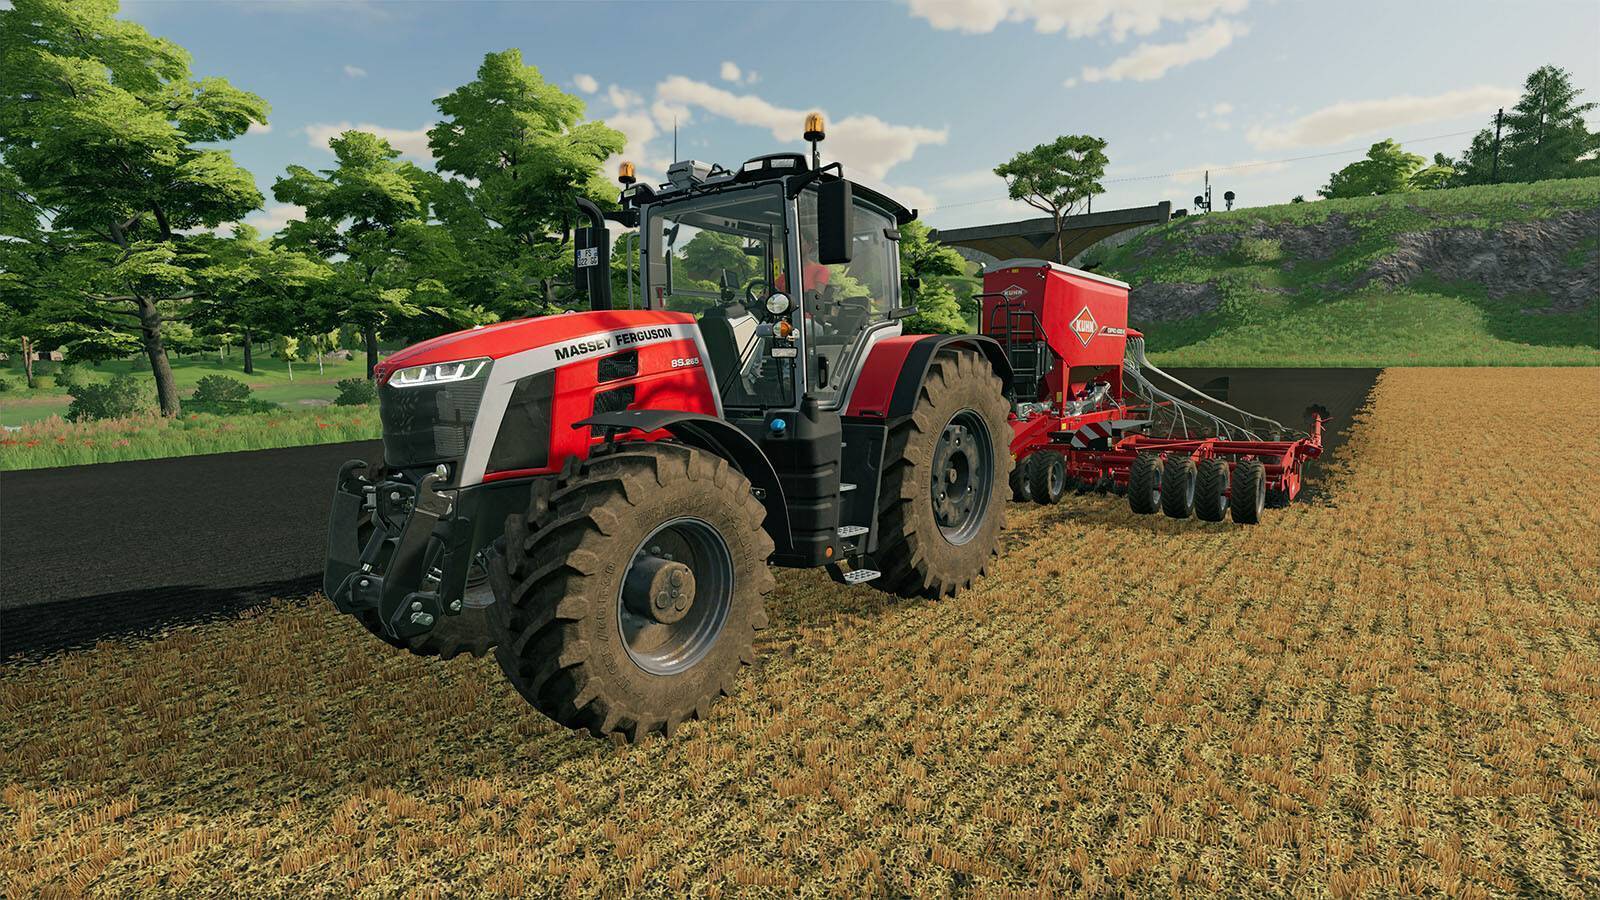 What is Farming Simulator 22's Platinum Edition, and What Is the Pre-order  Bonus?